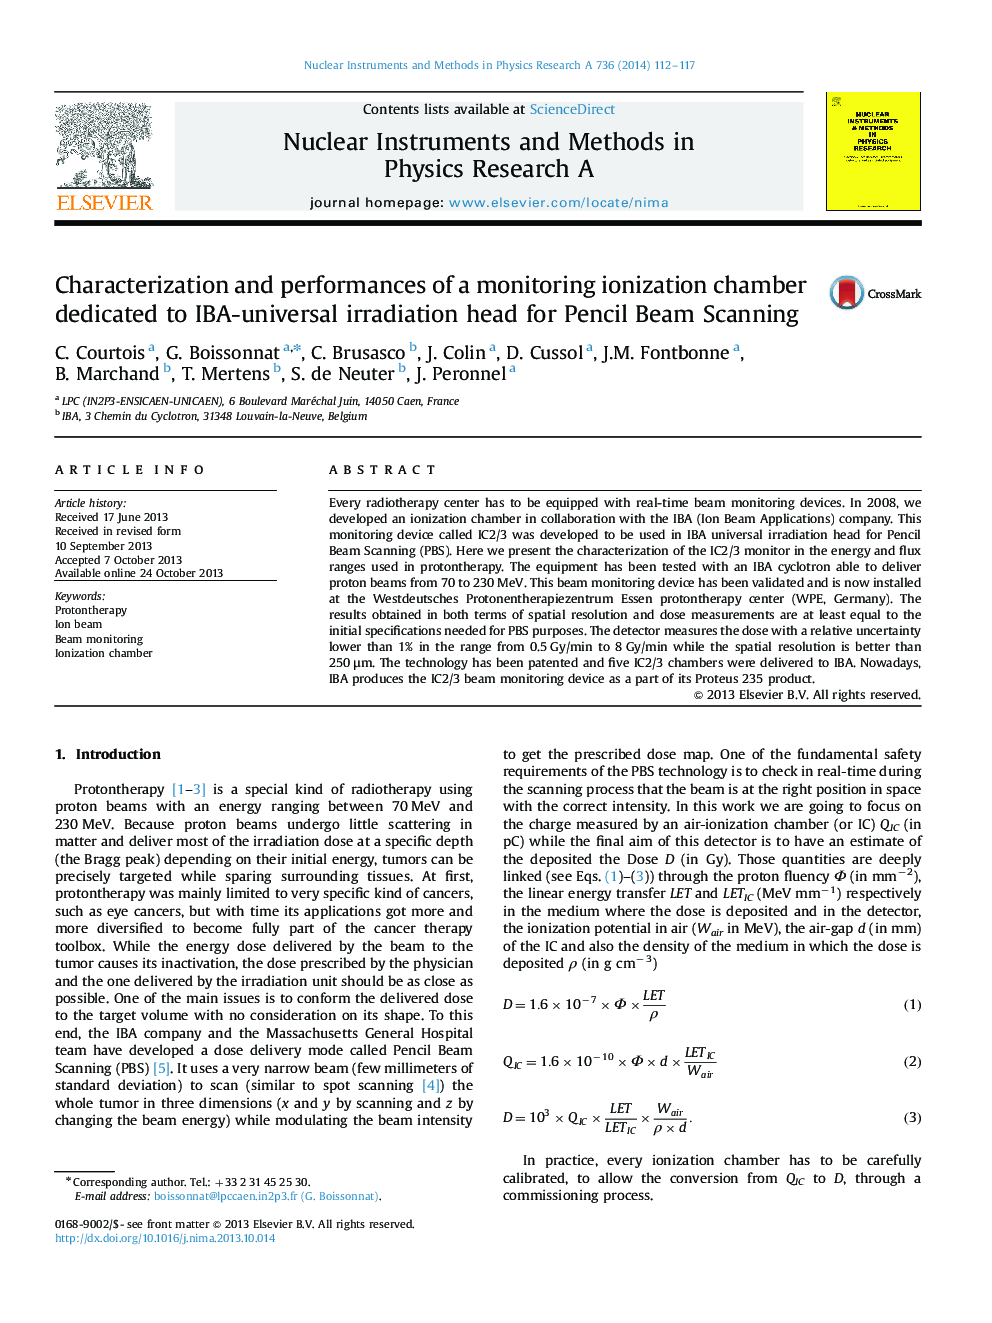 Characterization and performances of a monitoring ionization chamber dedicated to IBA-universal irradiation head for Pencil Beam Scanning